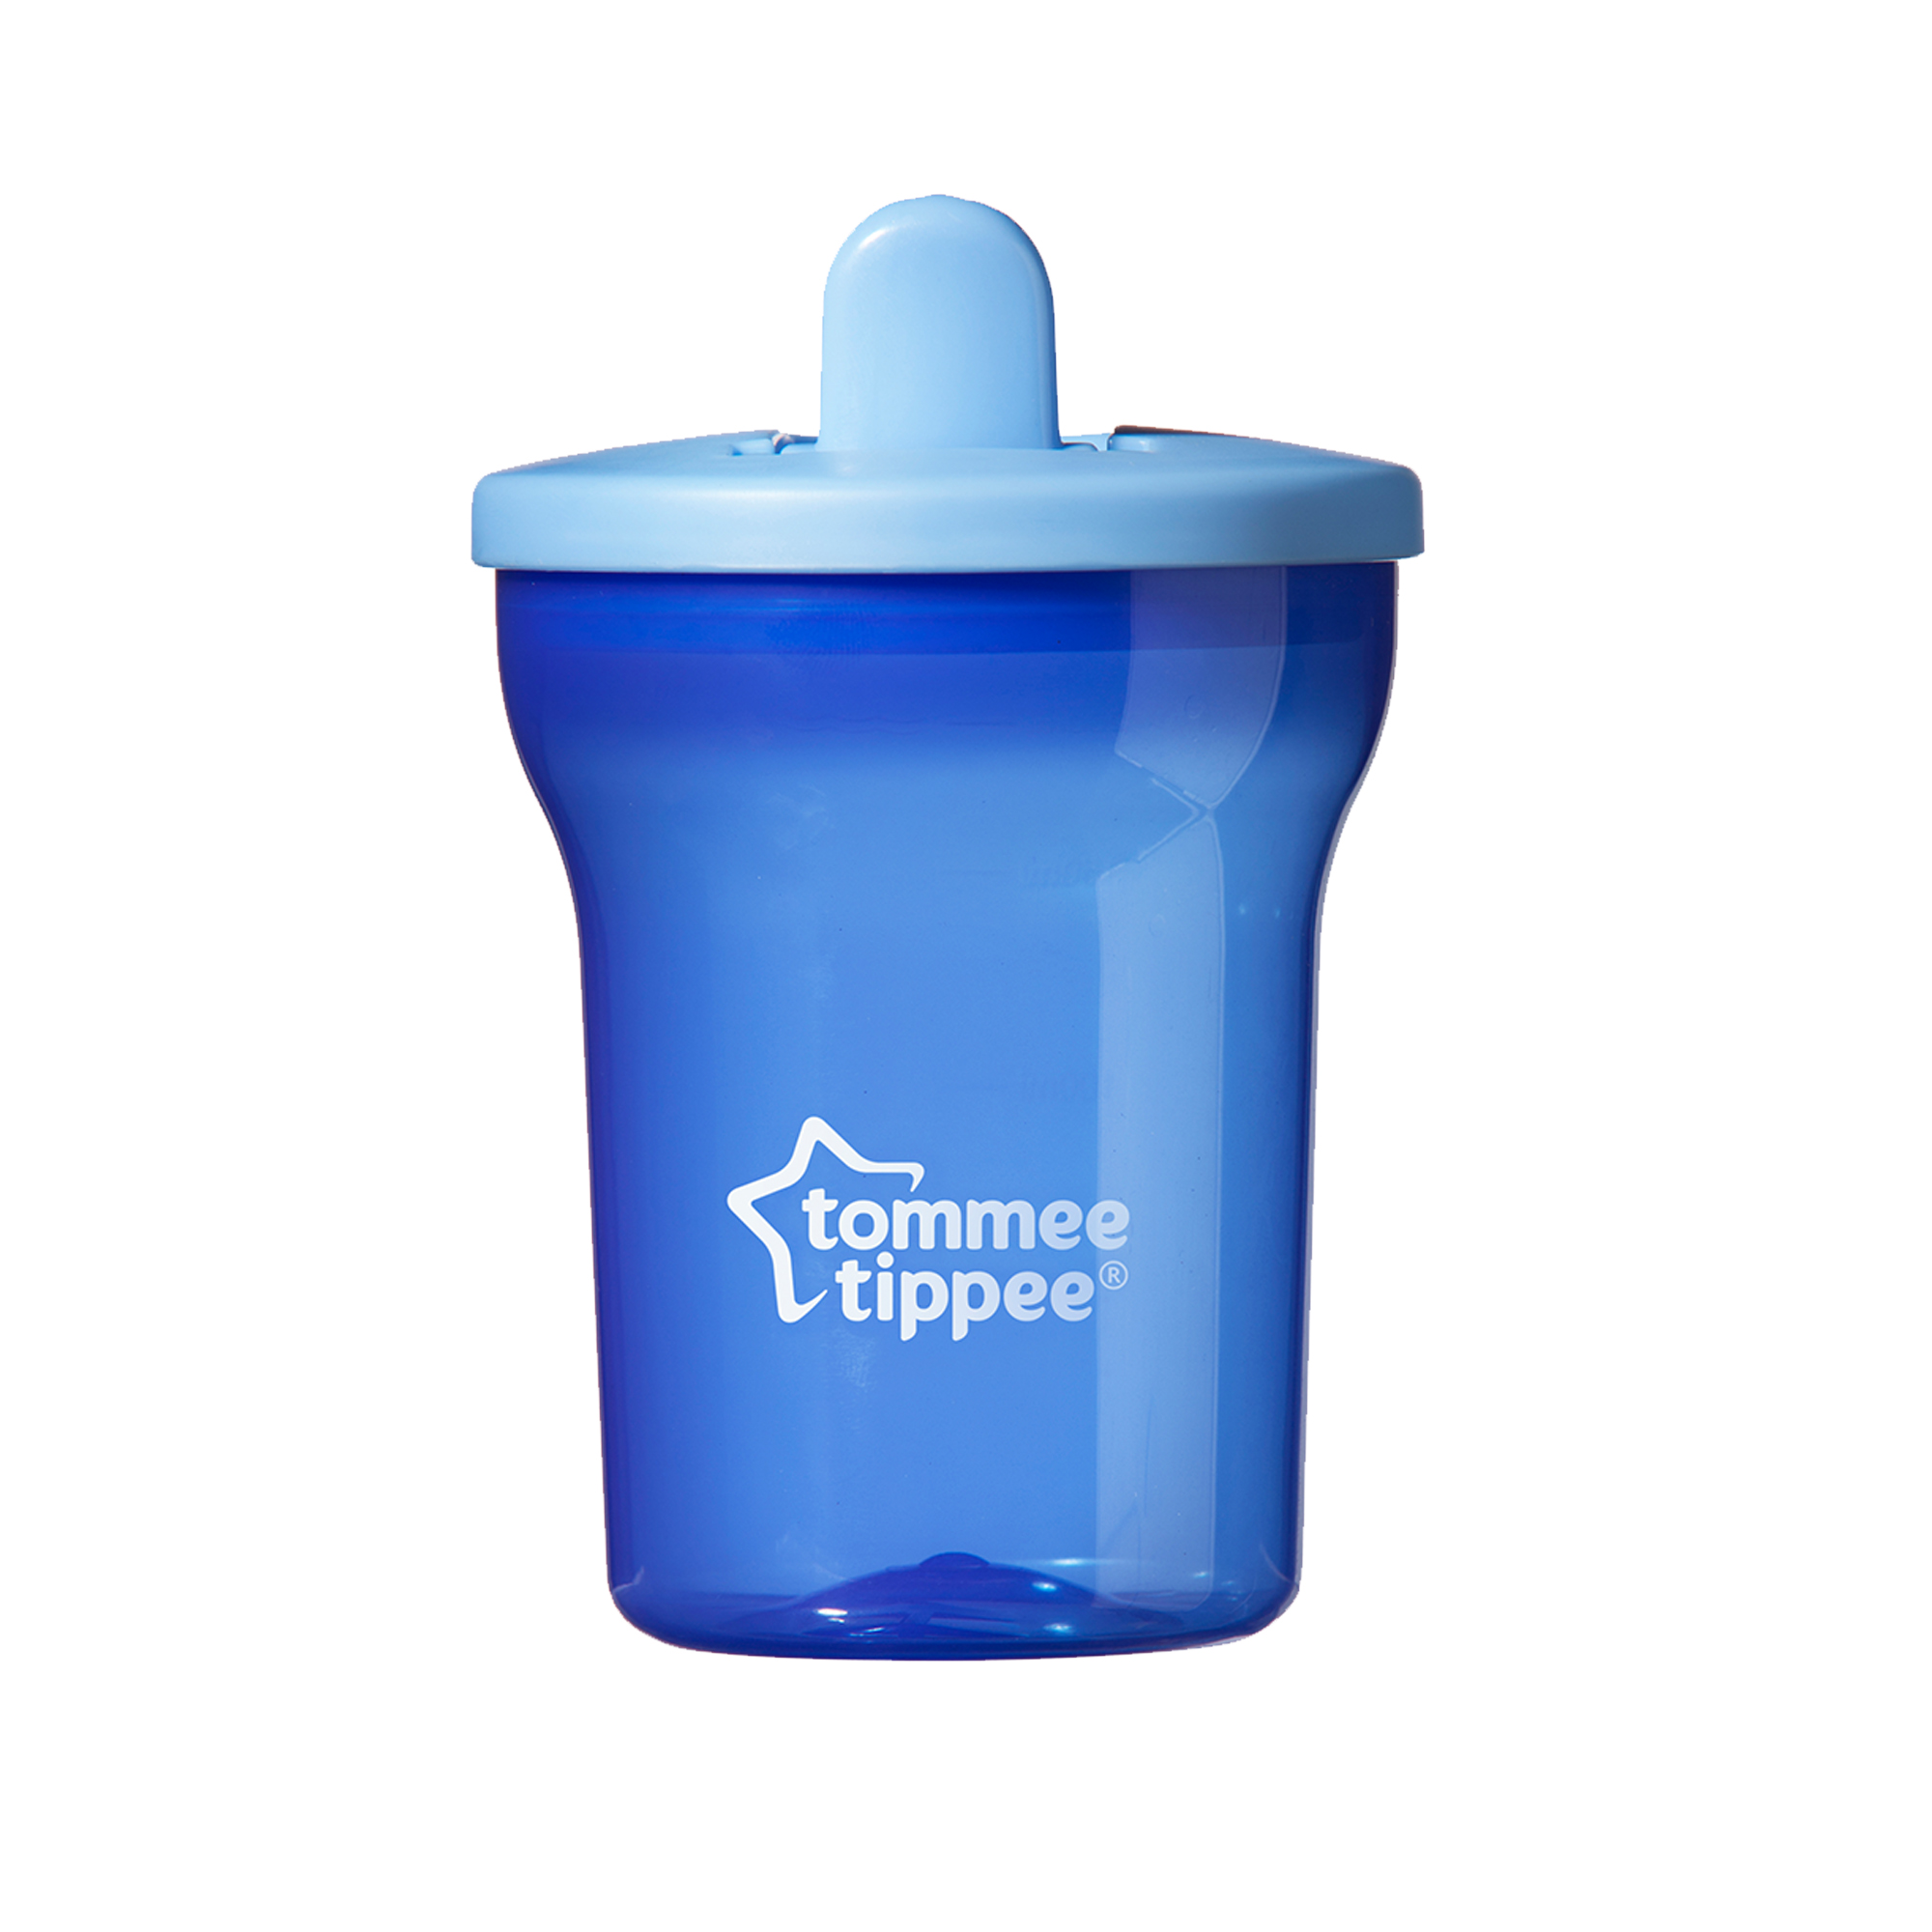 Tommee Tippee First Cup - Beakers & cups - Feeding